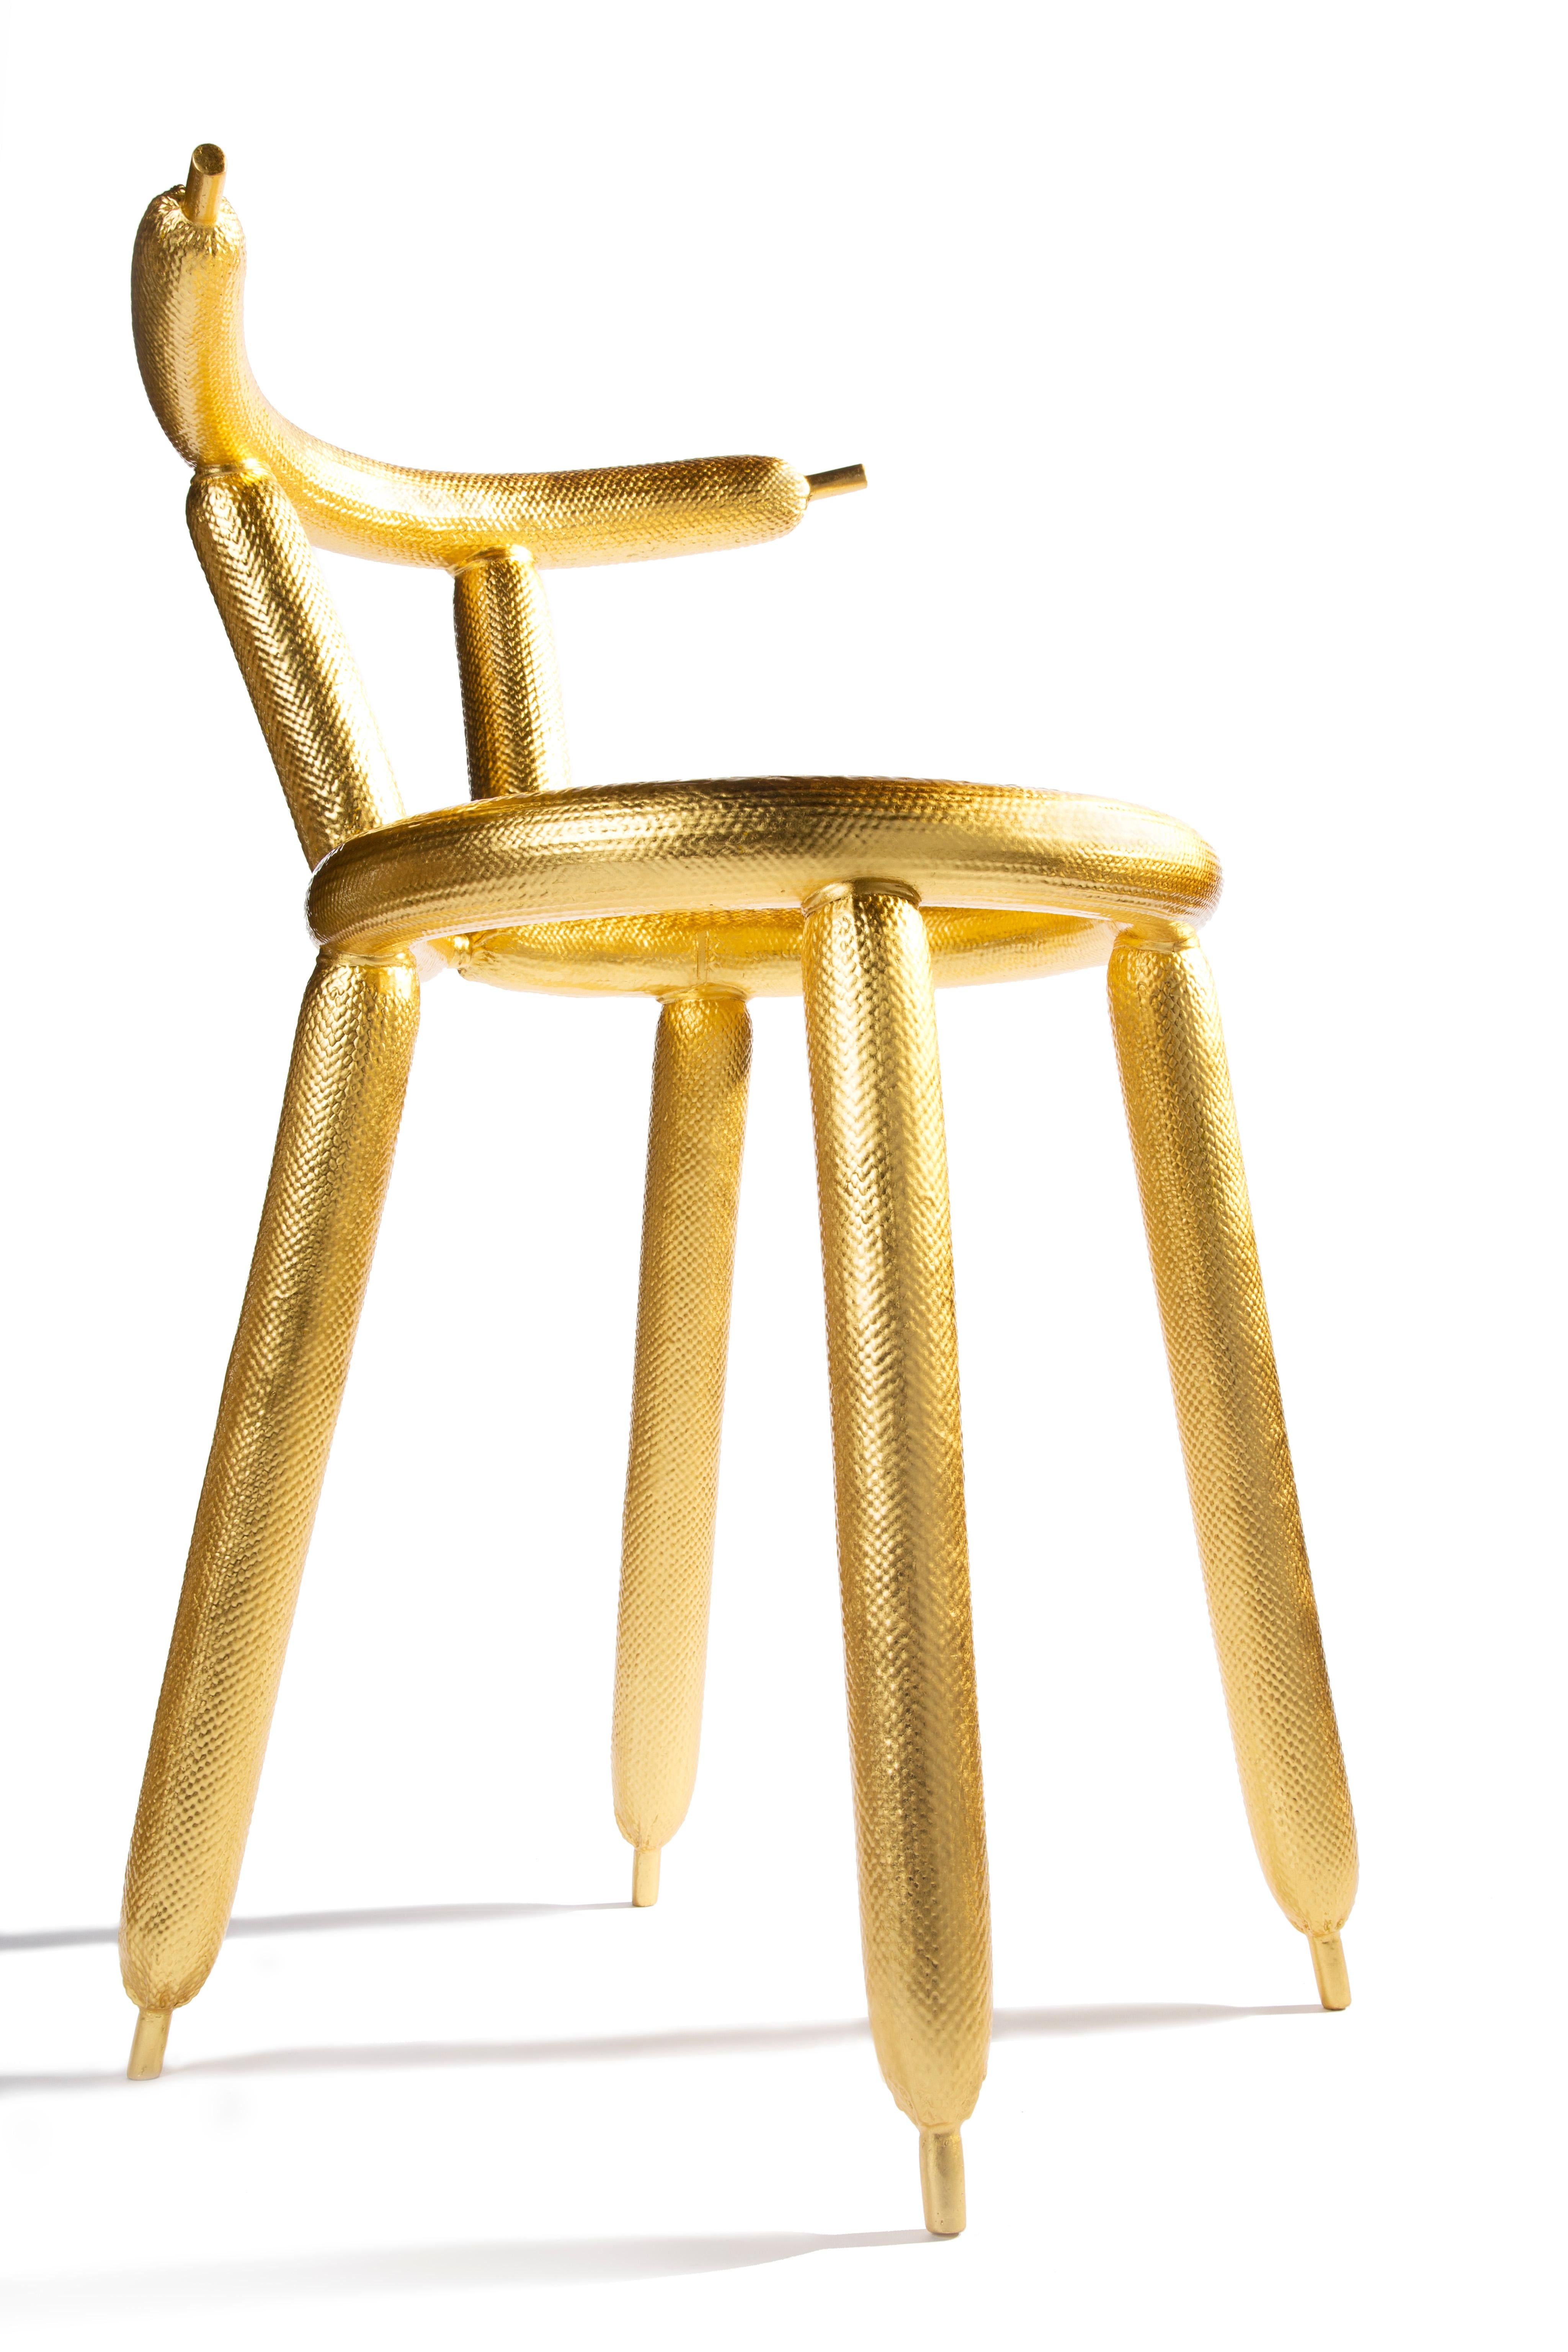 Carbon Balloon Chair Gold, by Marcel Wanders, 2013, Limited Edition #2/5 For Sale 1